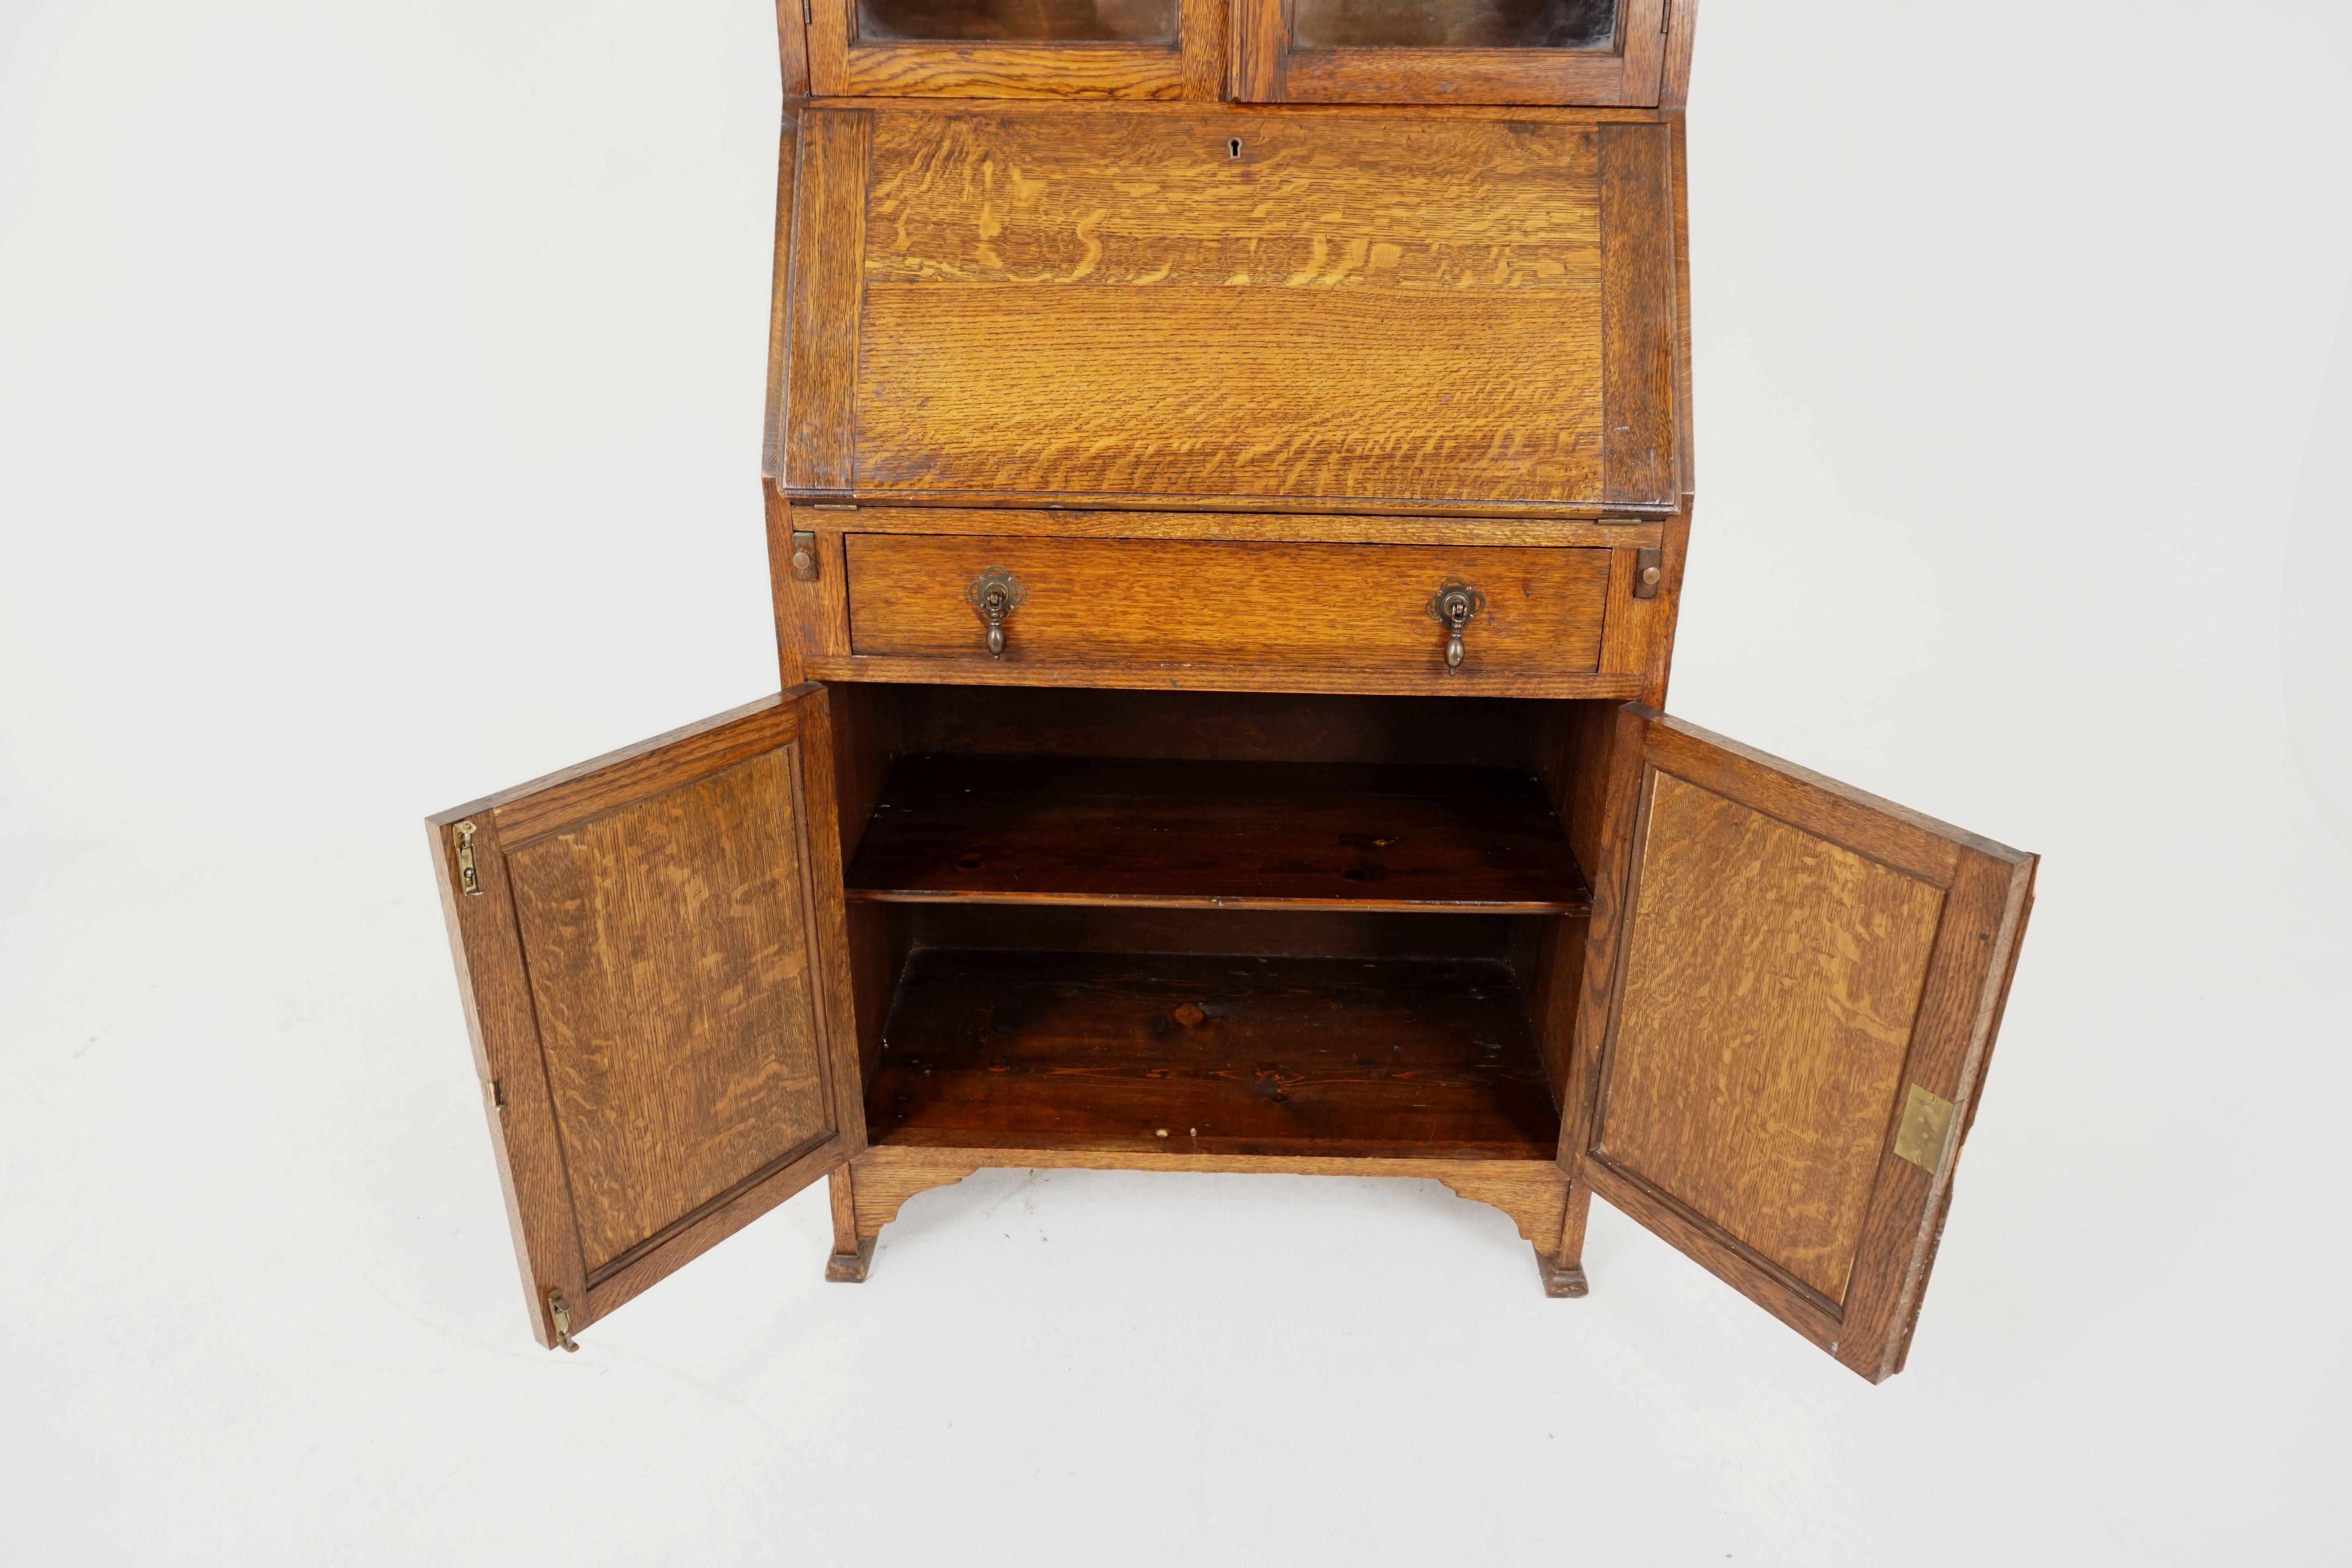 Hand-Crafted Antique Oak Desk, Drop Front Desk with Bookcase Top, Scotland 1910, B1799